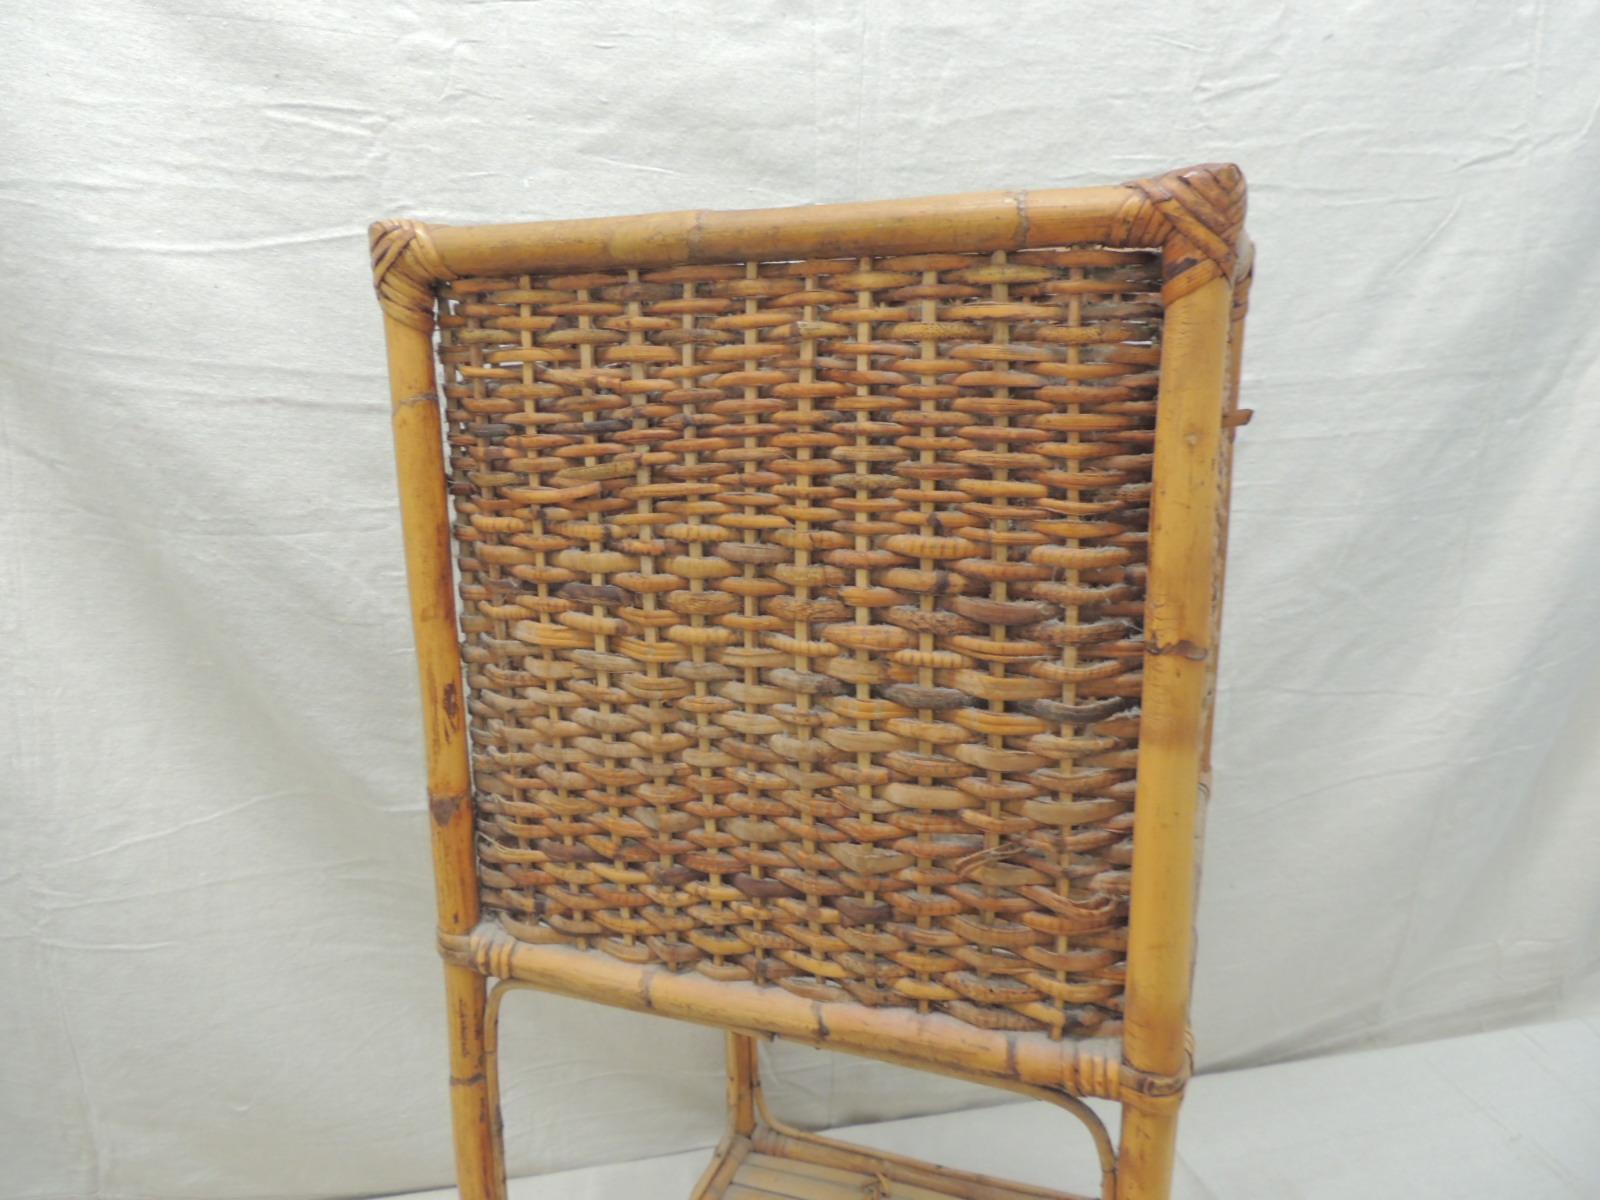 Vintage tall square bamboo planter
Square woven basket on the top and slotted bamboo floor shelf.
Size: 14.5” D x 14” S.W. x 30” H.
 